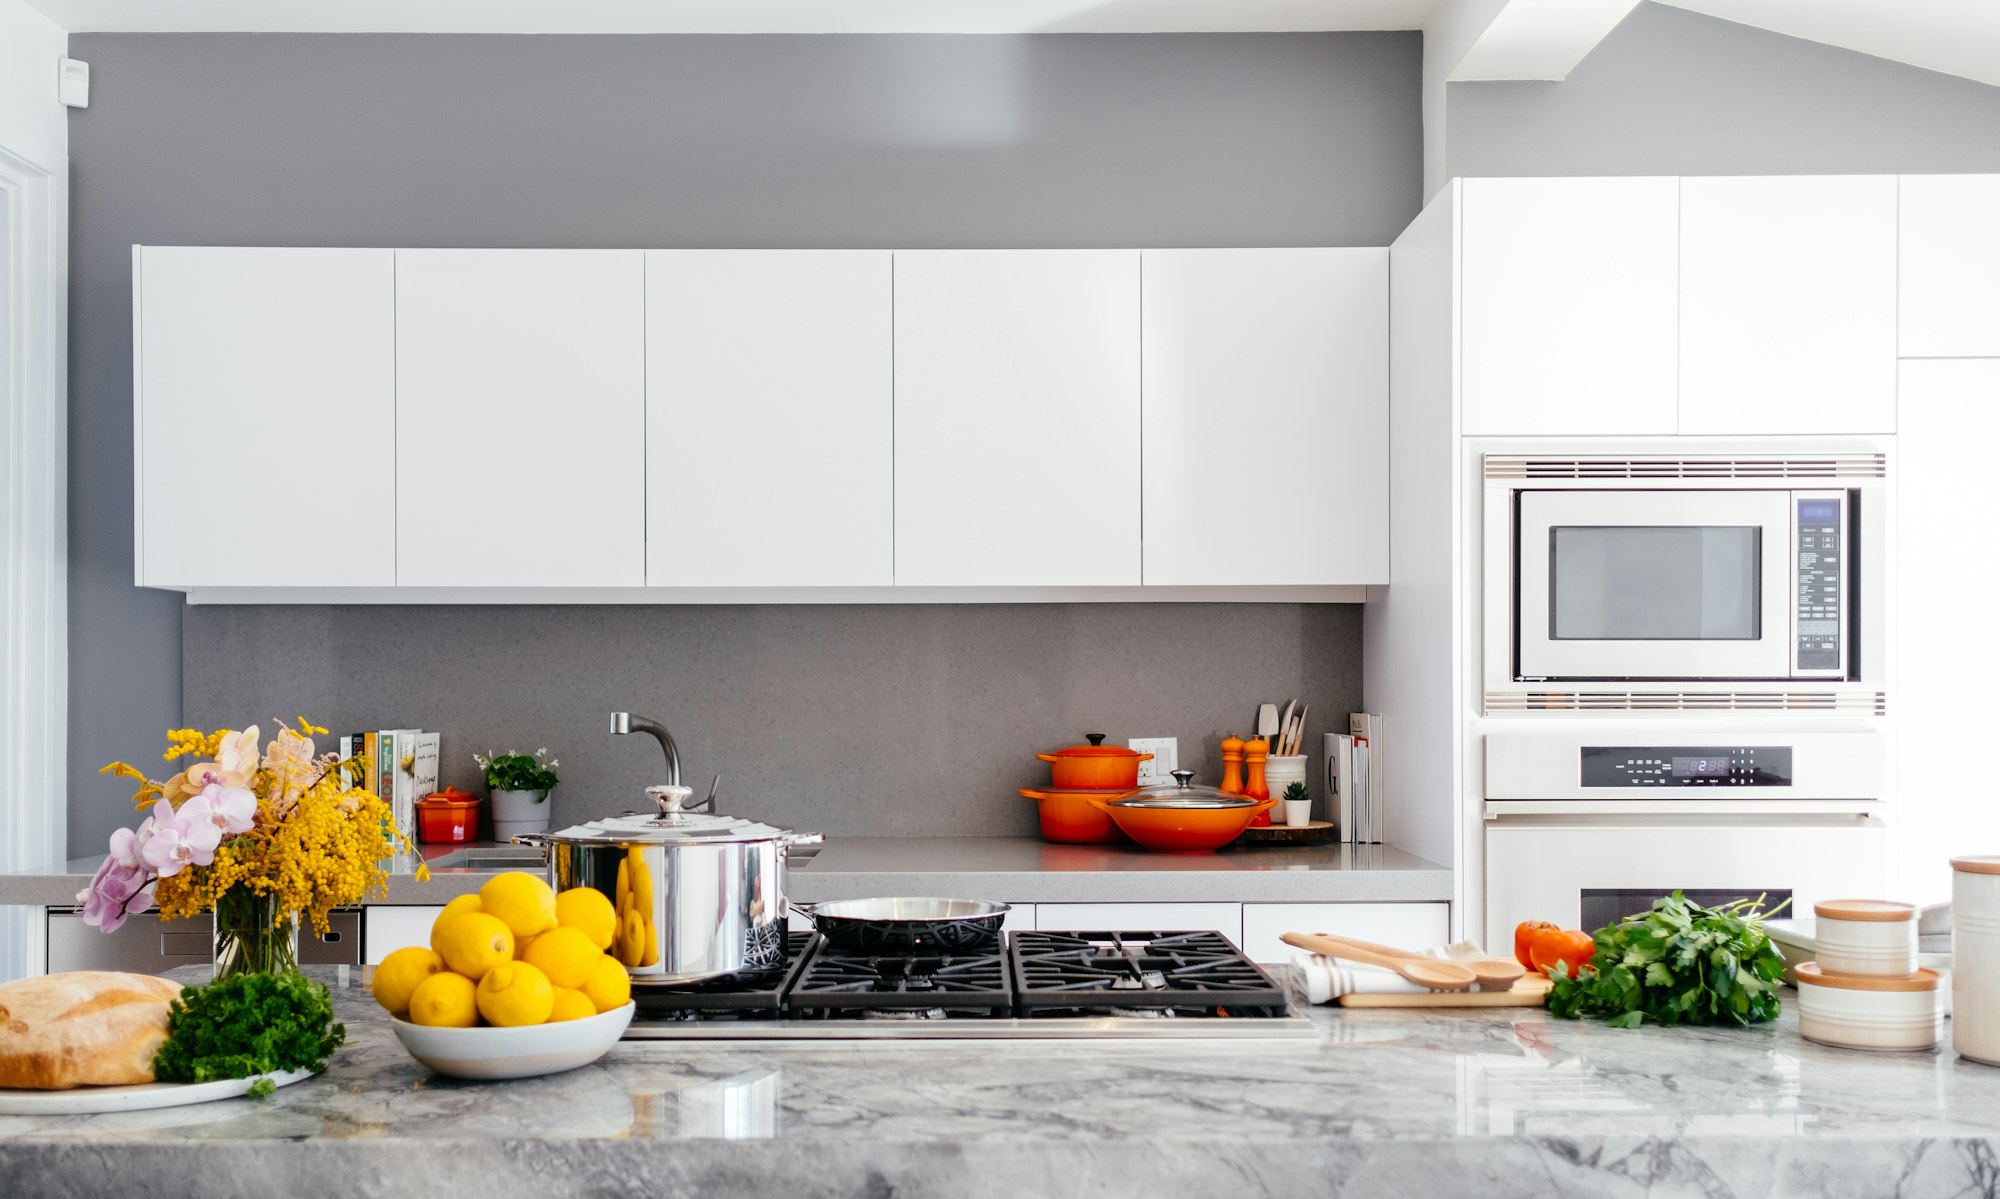 7 Tips for Designing a Functional Kitchen